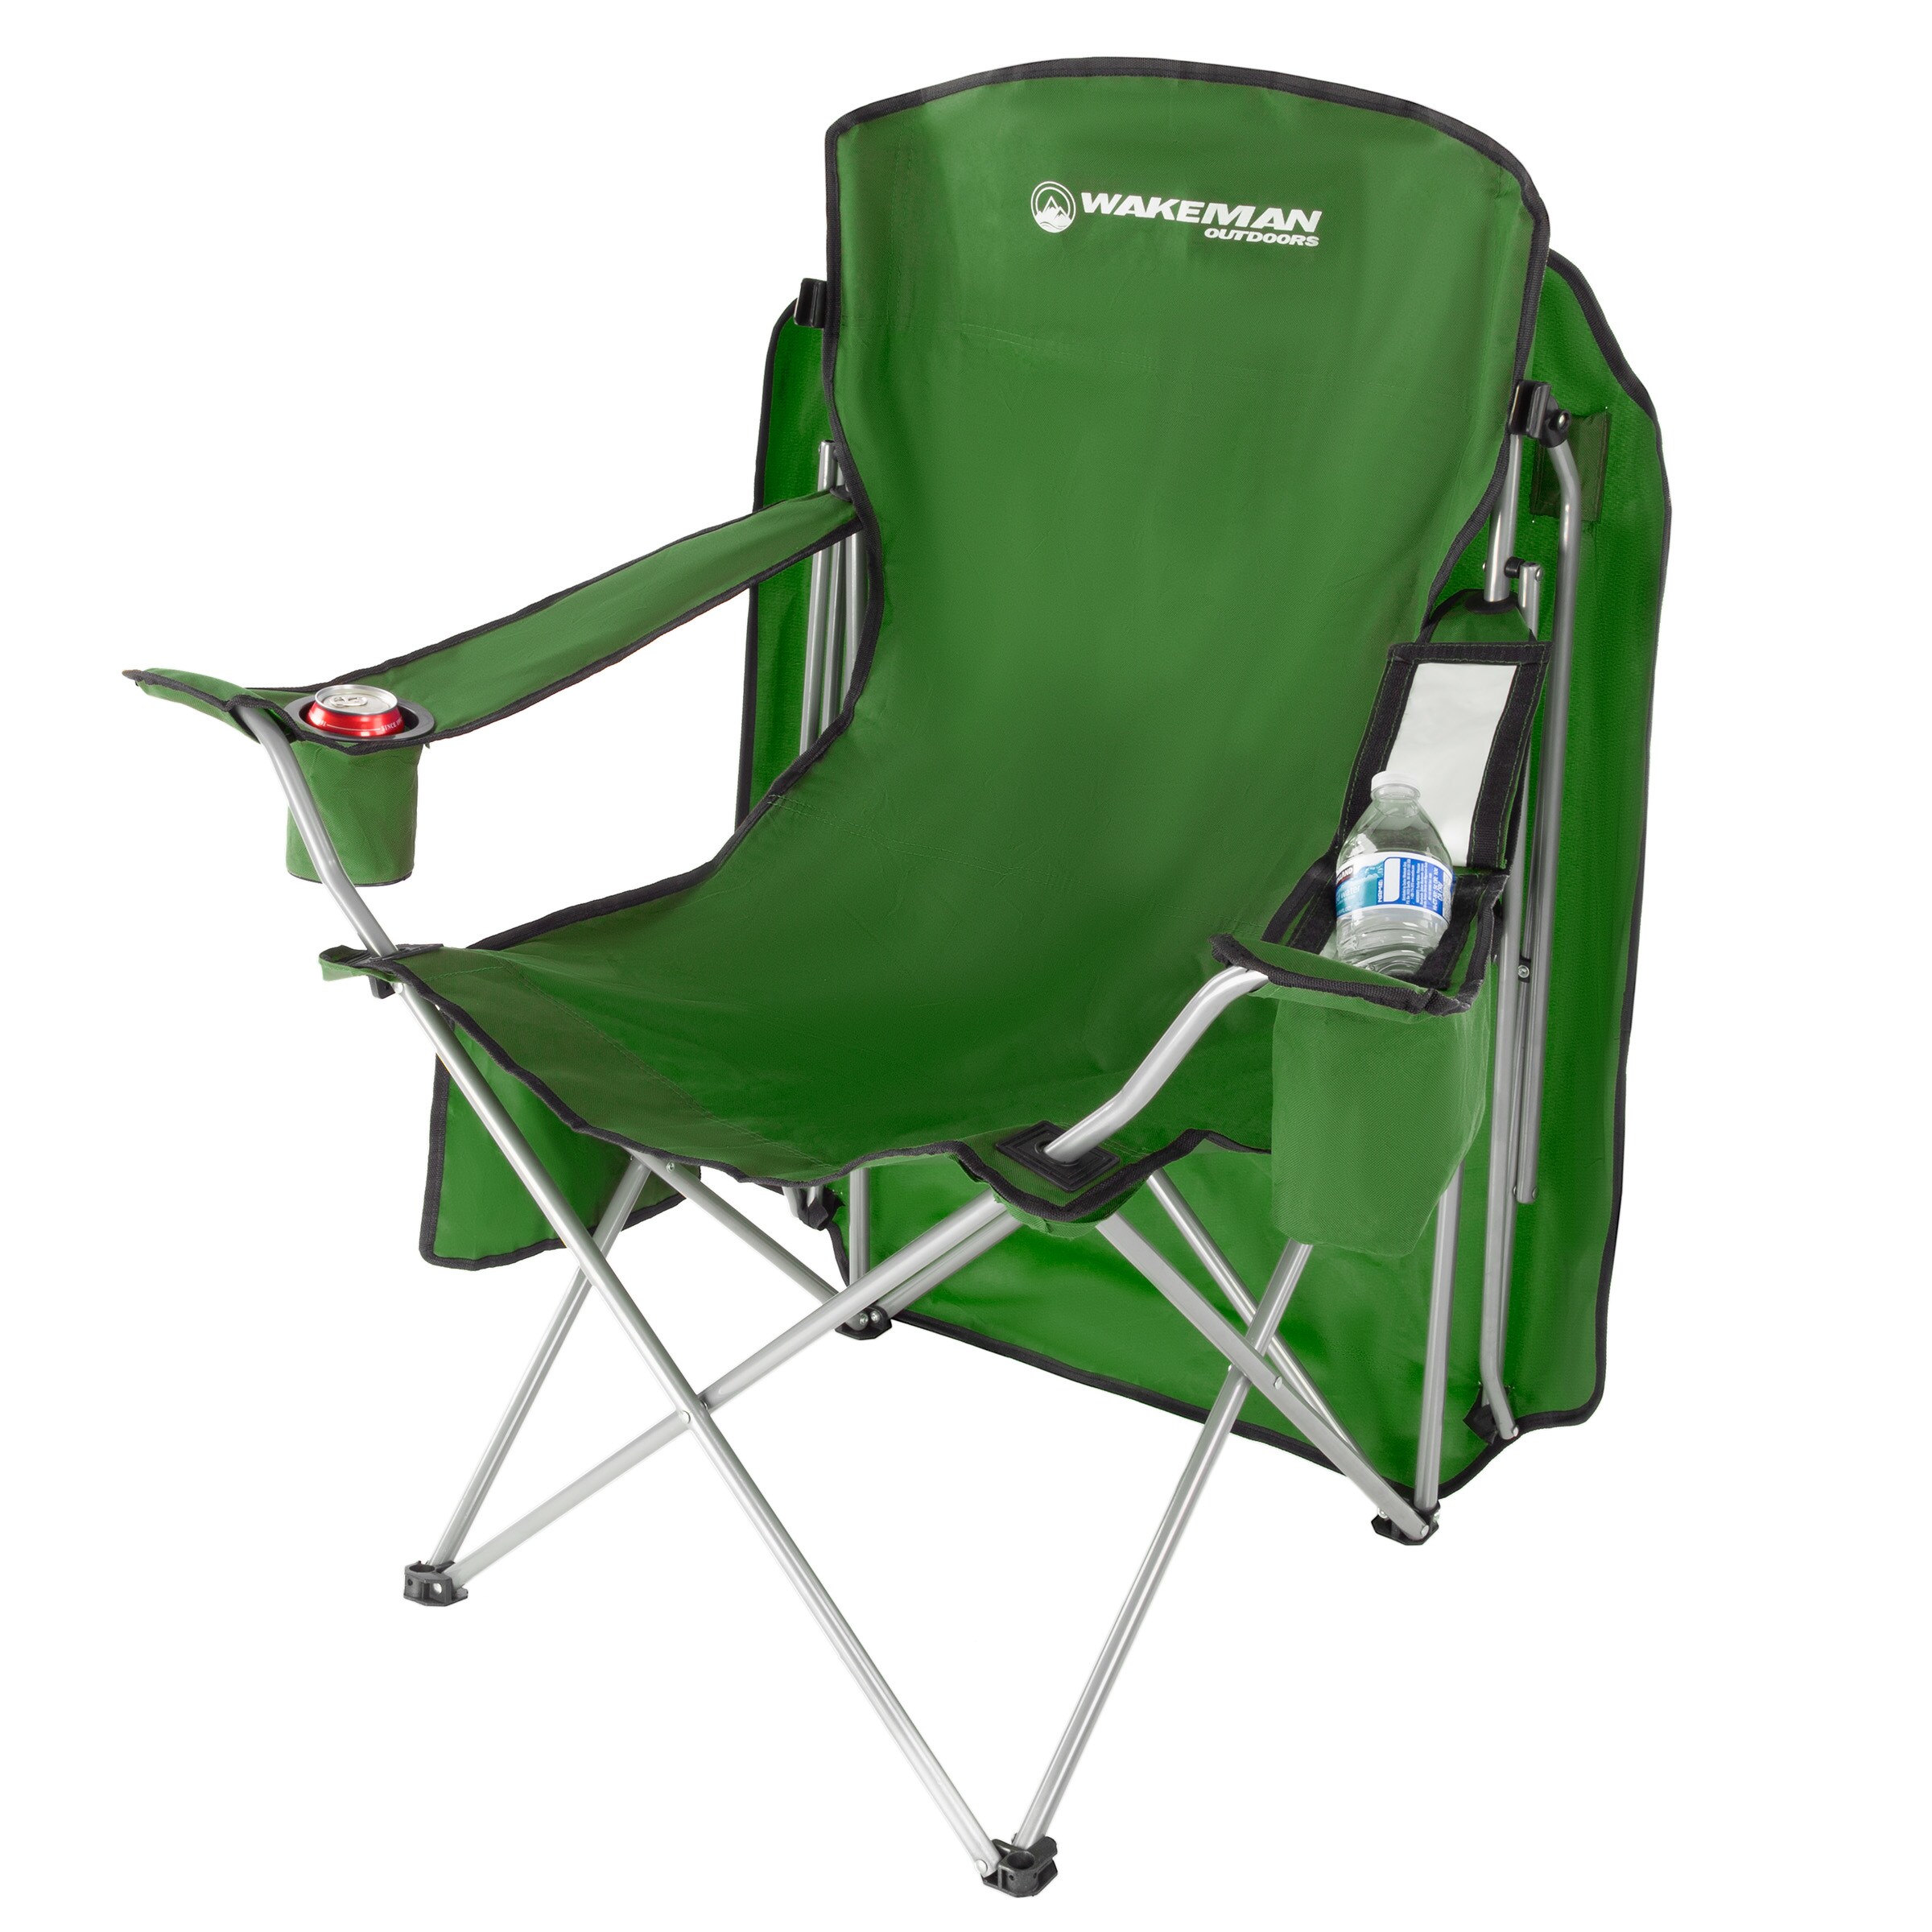 Leisure Sports Green Folding Camping Chair at